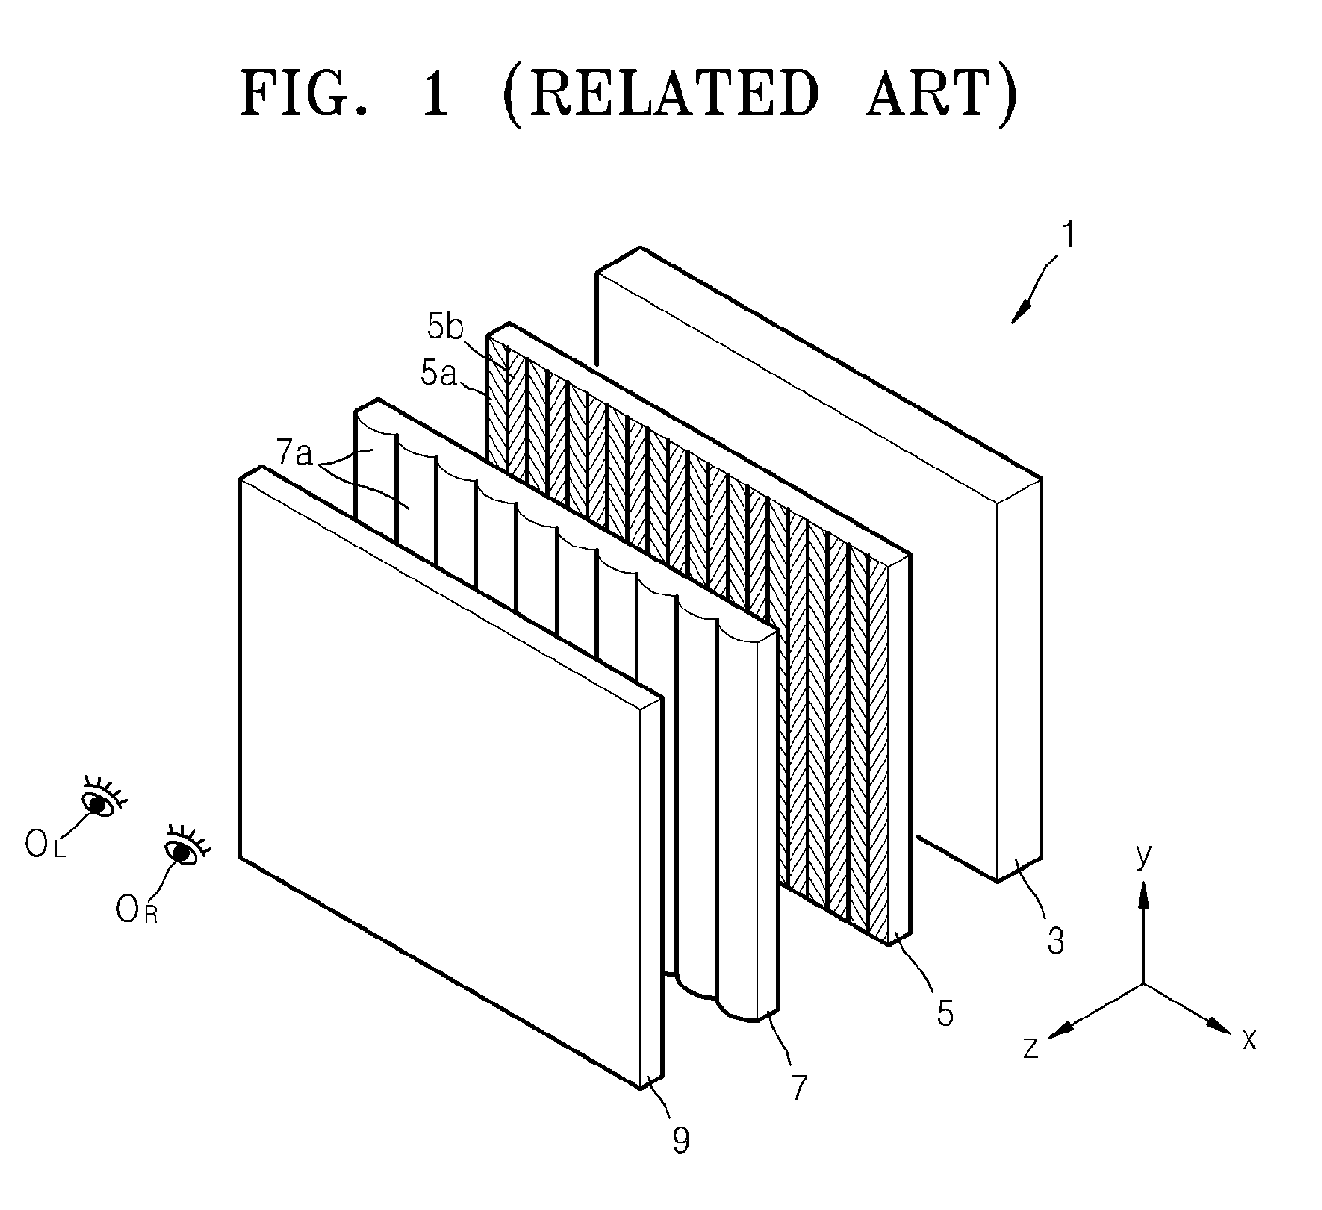 Backlight unit and 2d/3d switchable image display device employing the backlight unit